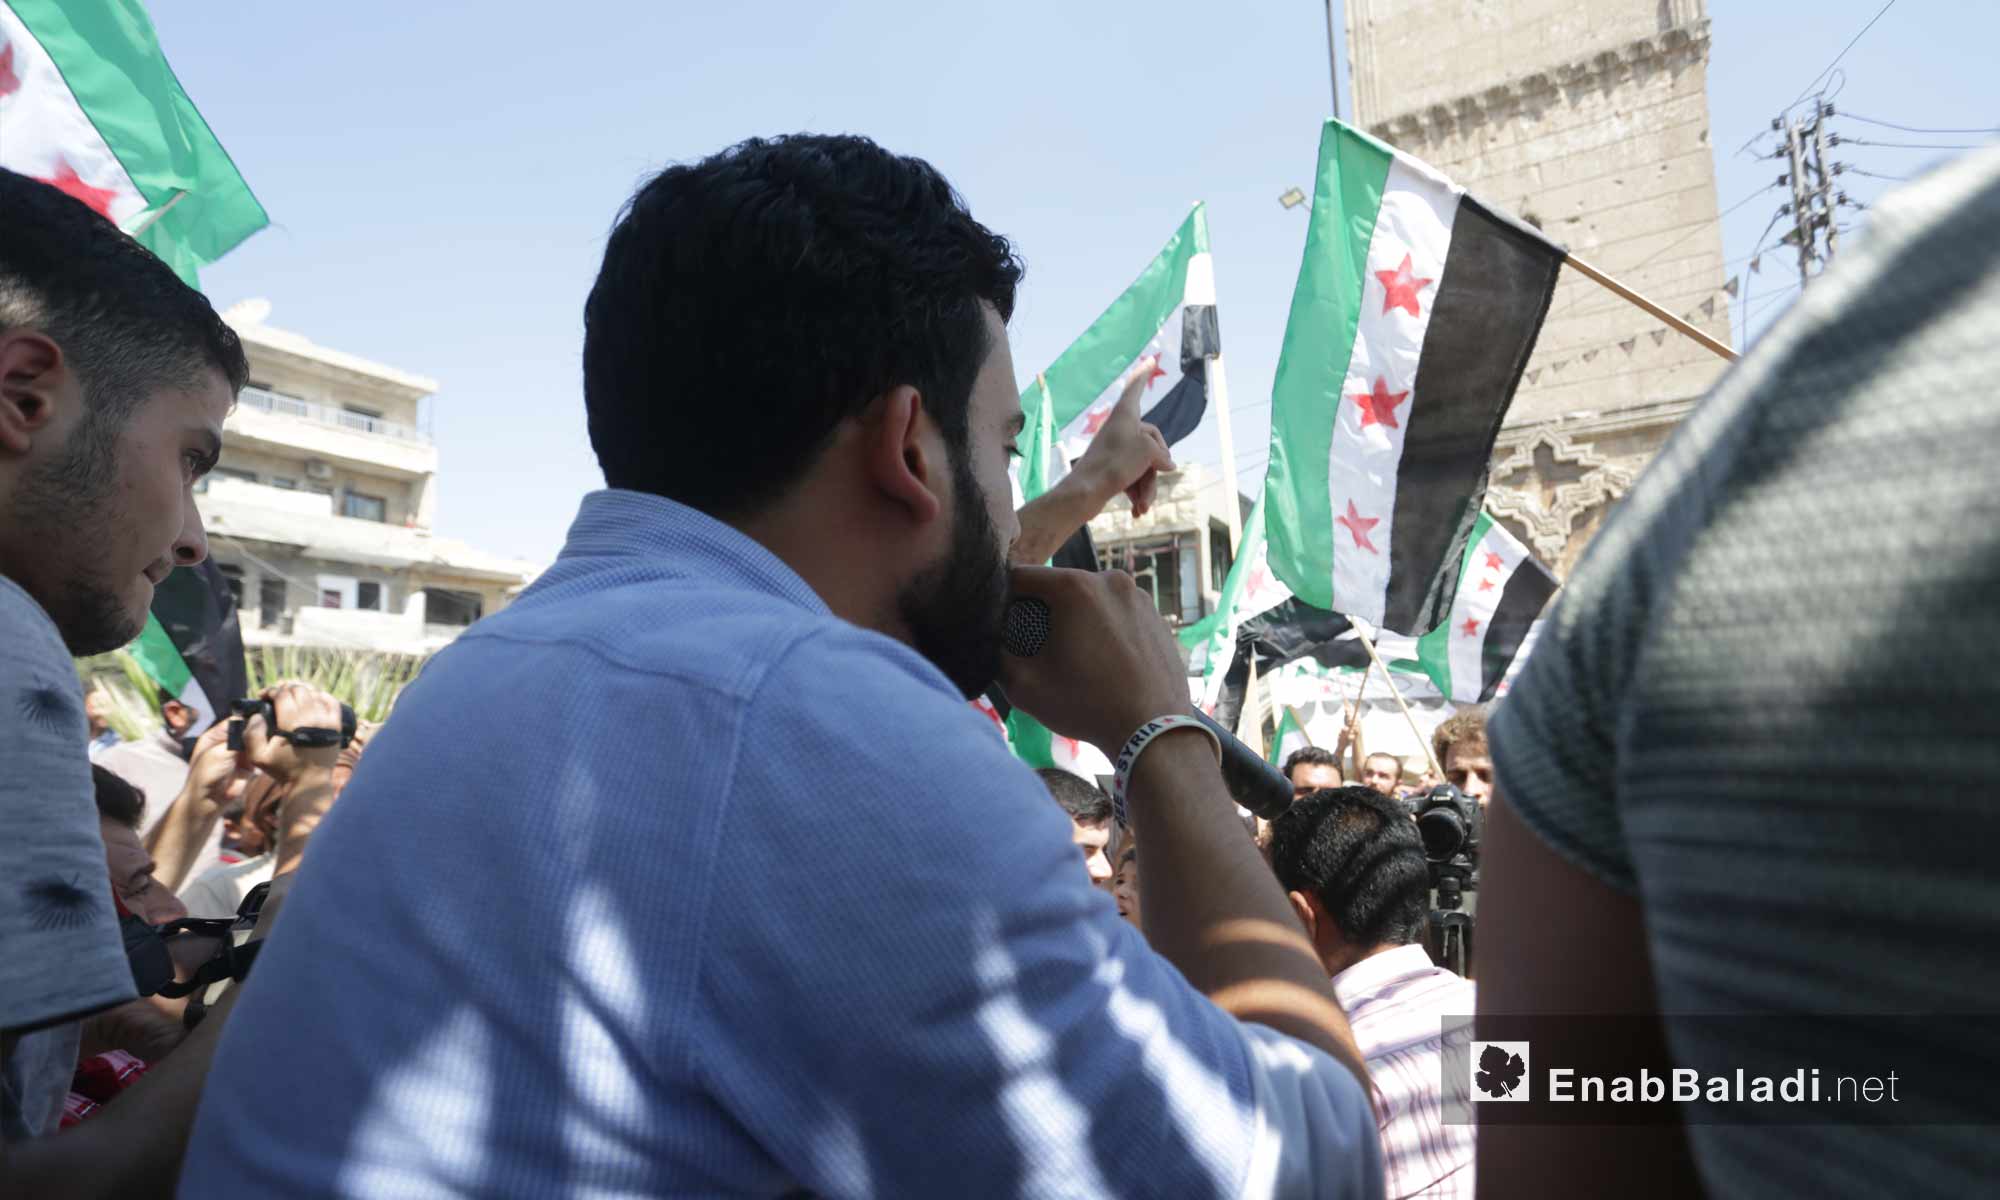 People in Ma`arat al-Nu`man, rural Idlib, protesting against the Sochi deal and demanding the ousting of the Syrian regime – September 6, 2019 (Enab Baladi) 